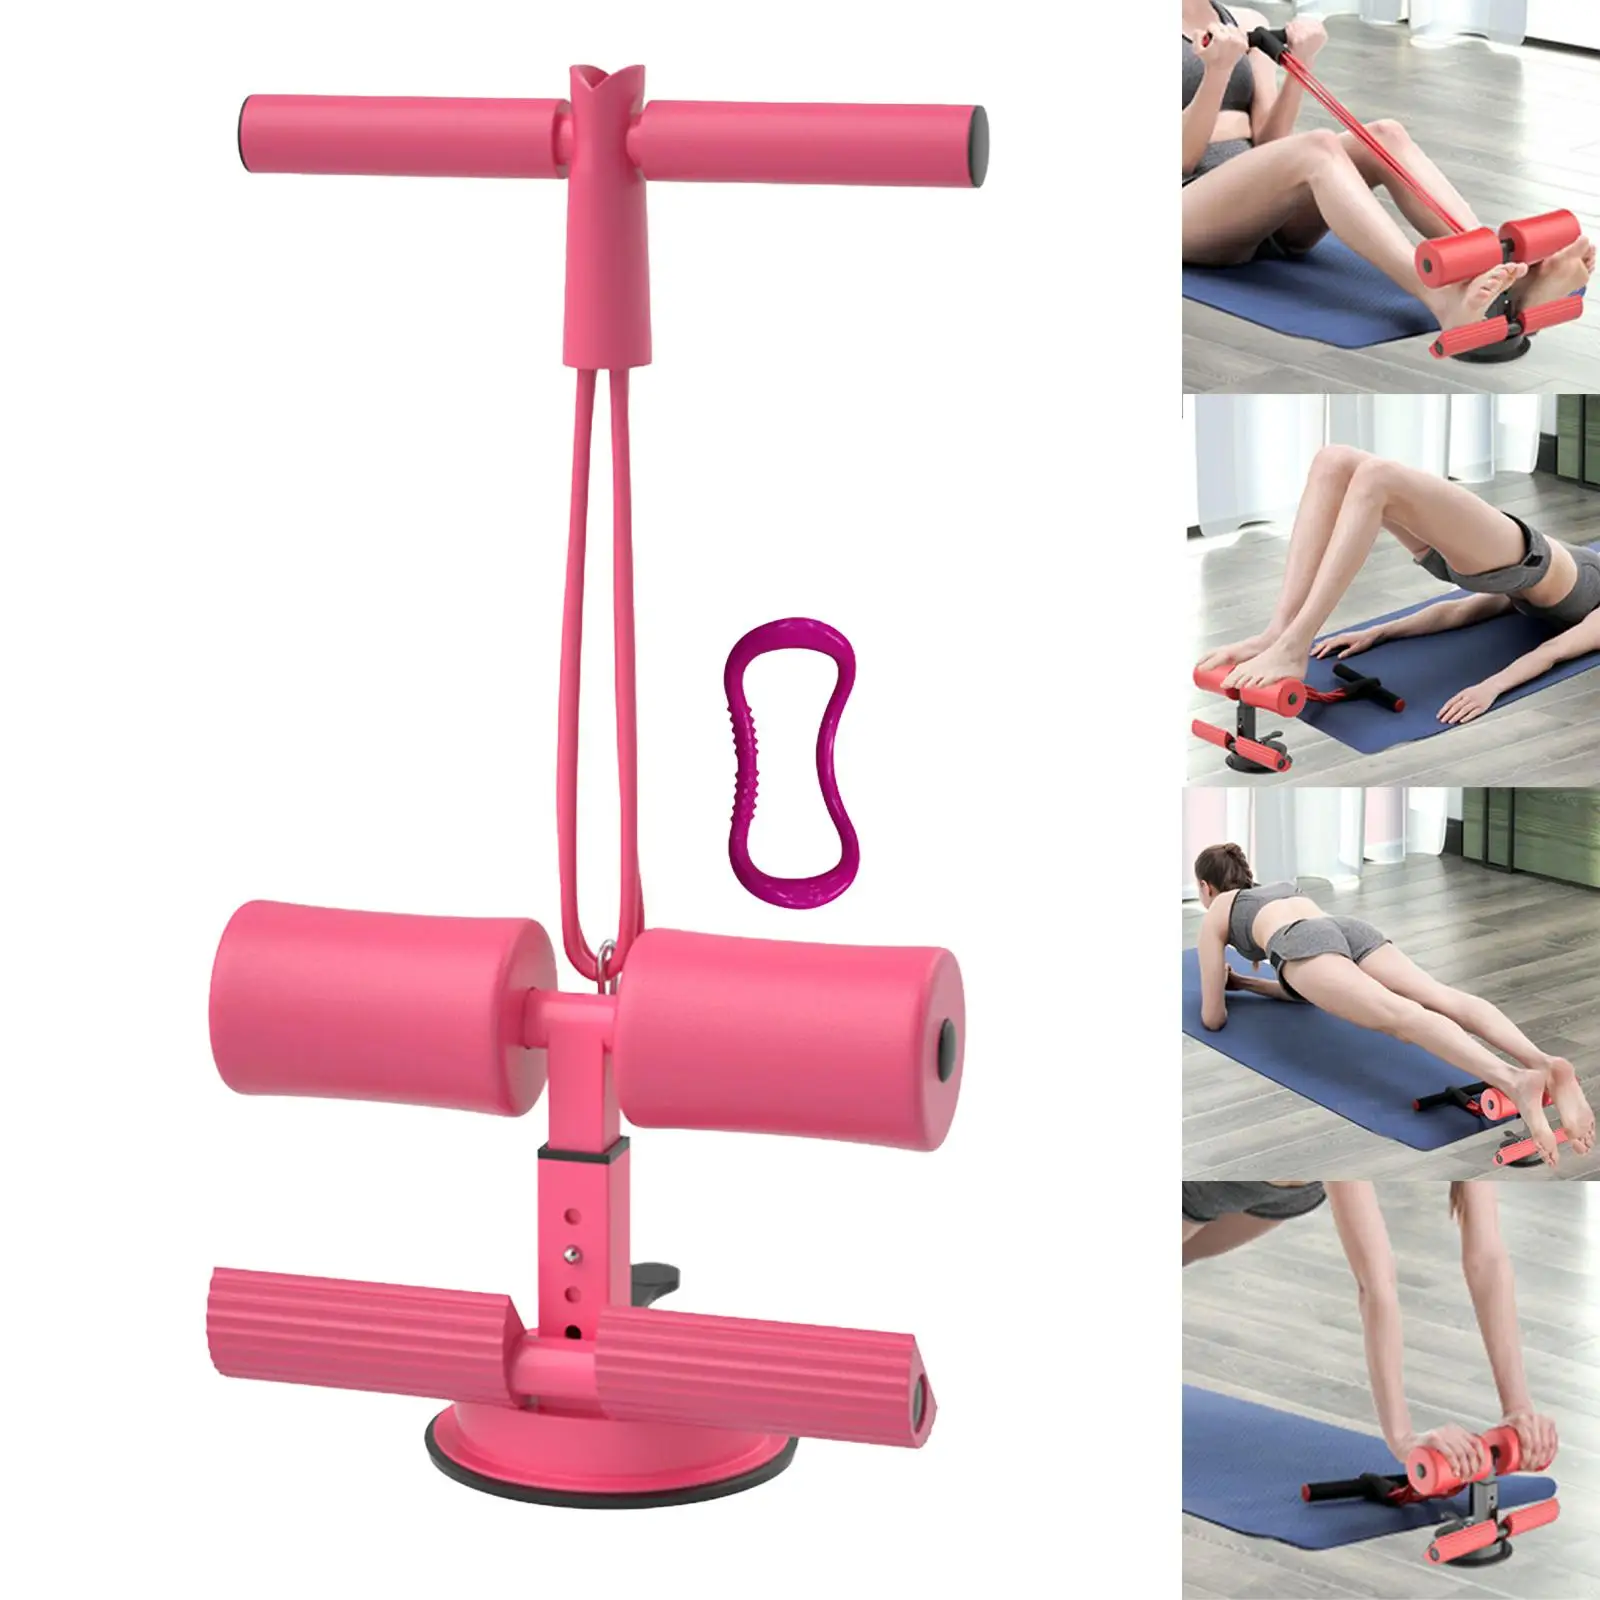  Support Fittings Aids Machine Sit up Rack for Fitness Workout Travel